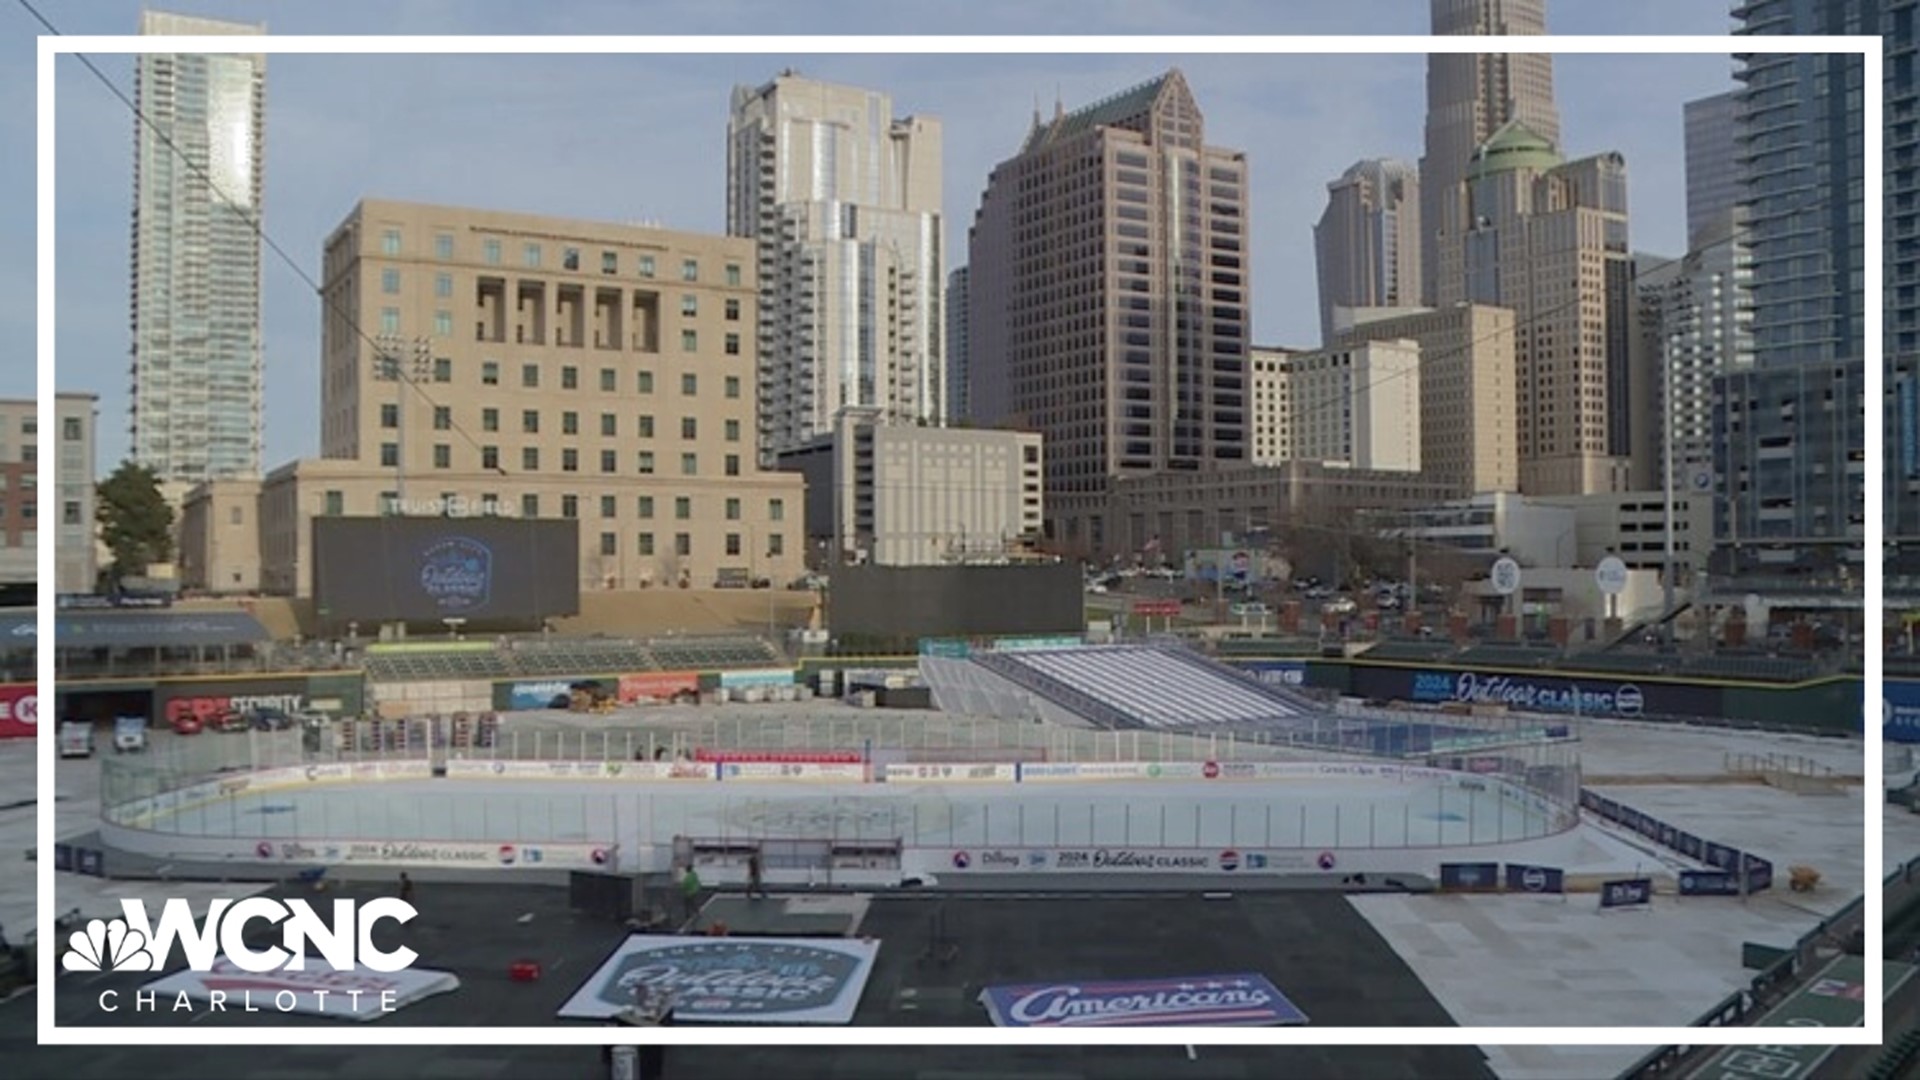 The Queen City Winter Classic will be the first outdoor hockey game in Charlotte Checkers history.